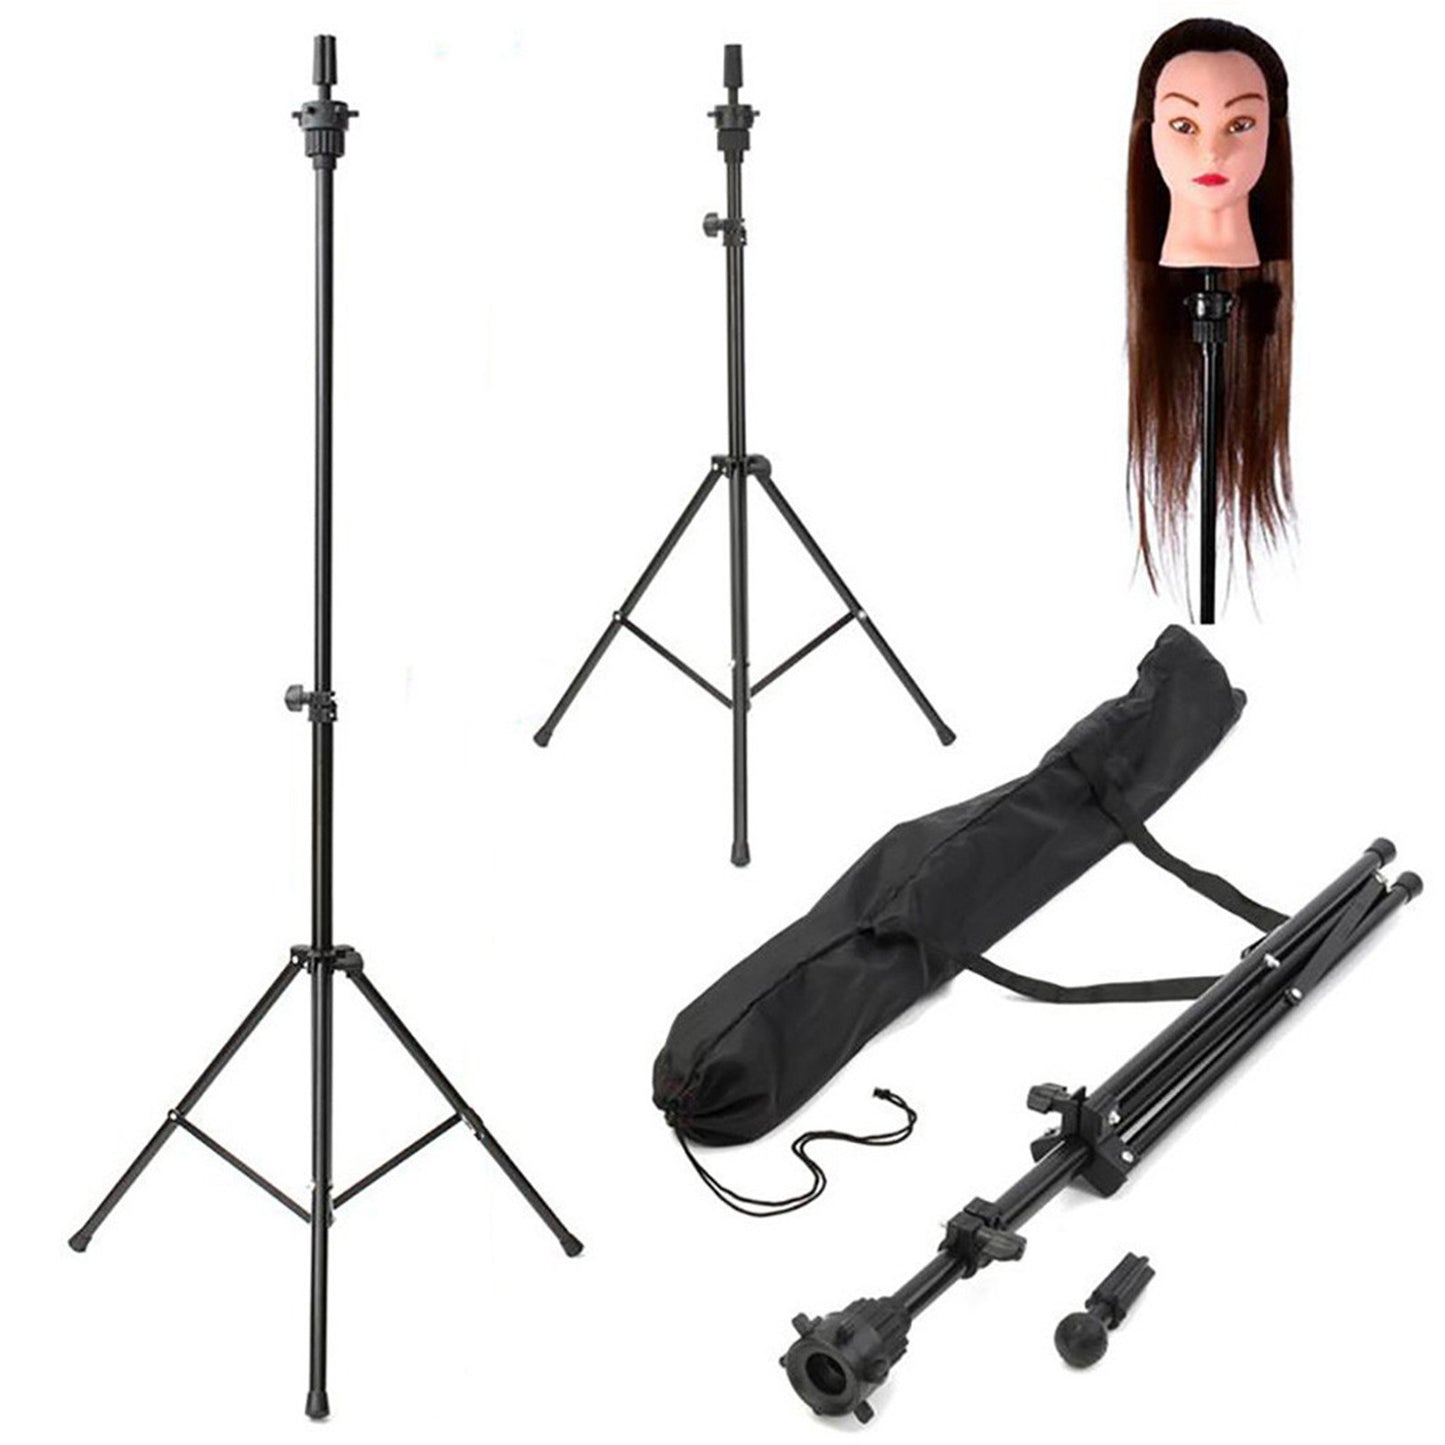 Adjustable Wig Head Tripod Stand Perfect for Wig making & Styling